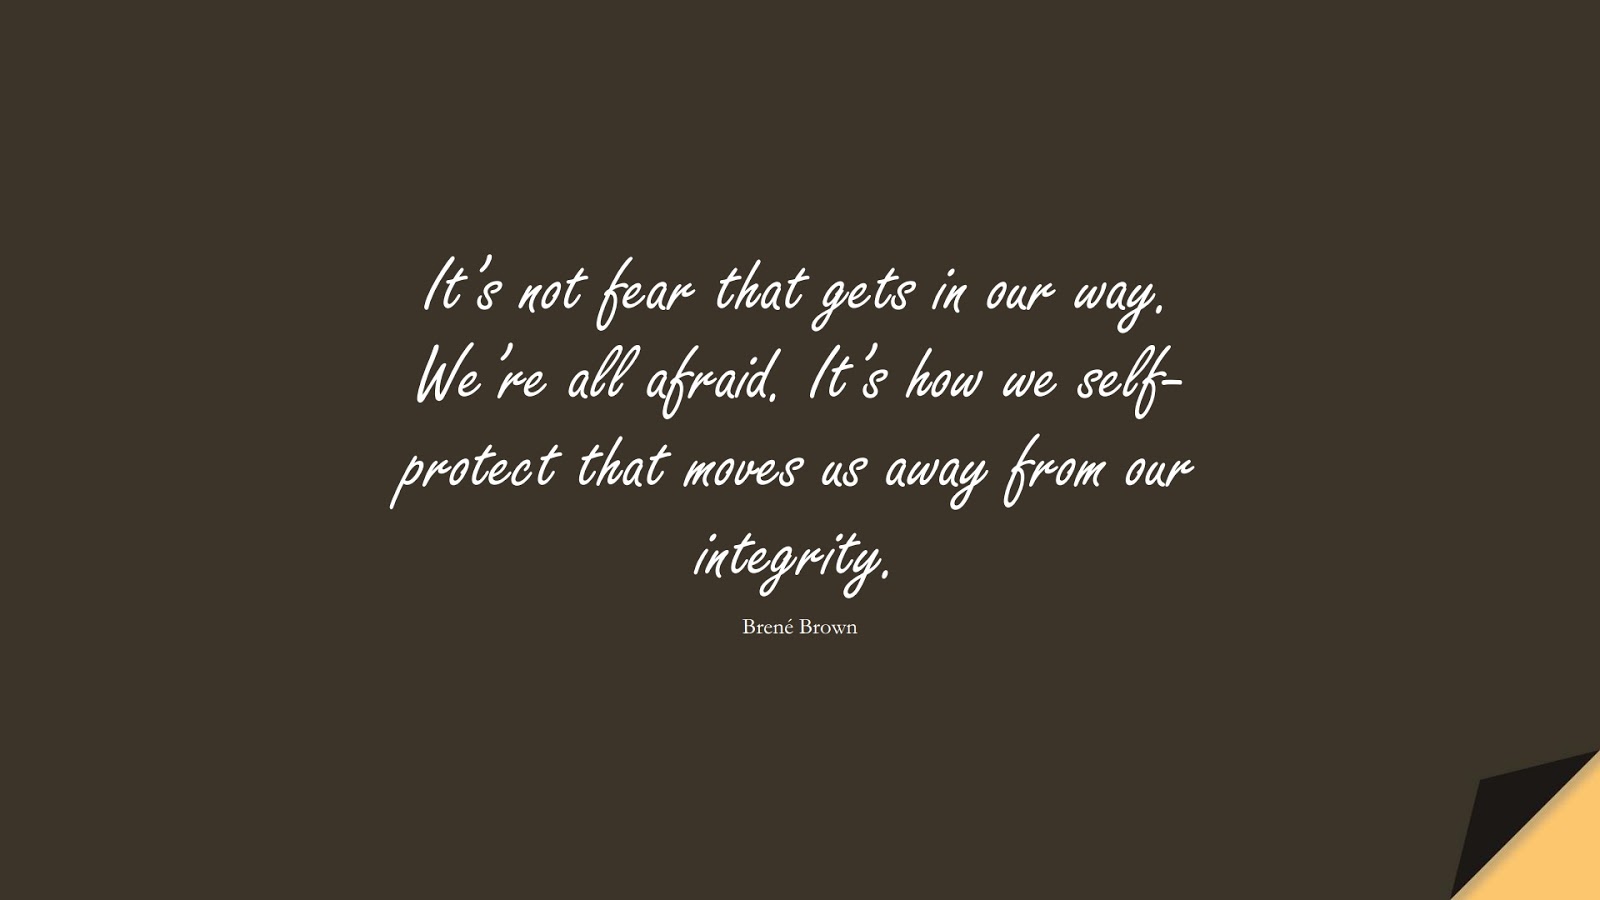 It’s not fear that gets in our way. We’re all afraid. It’s how we self-protect that moves us away from our integrity. (Brené Brown);  #FearQuotes